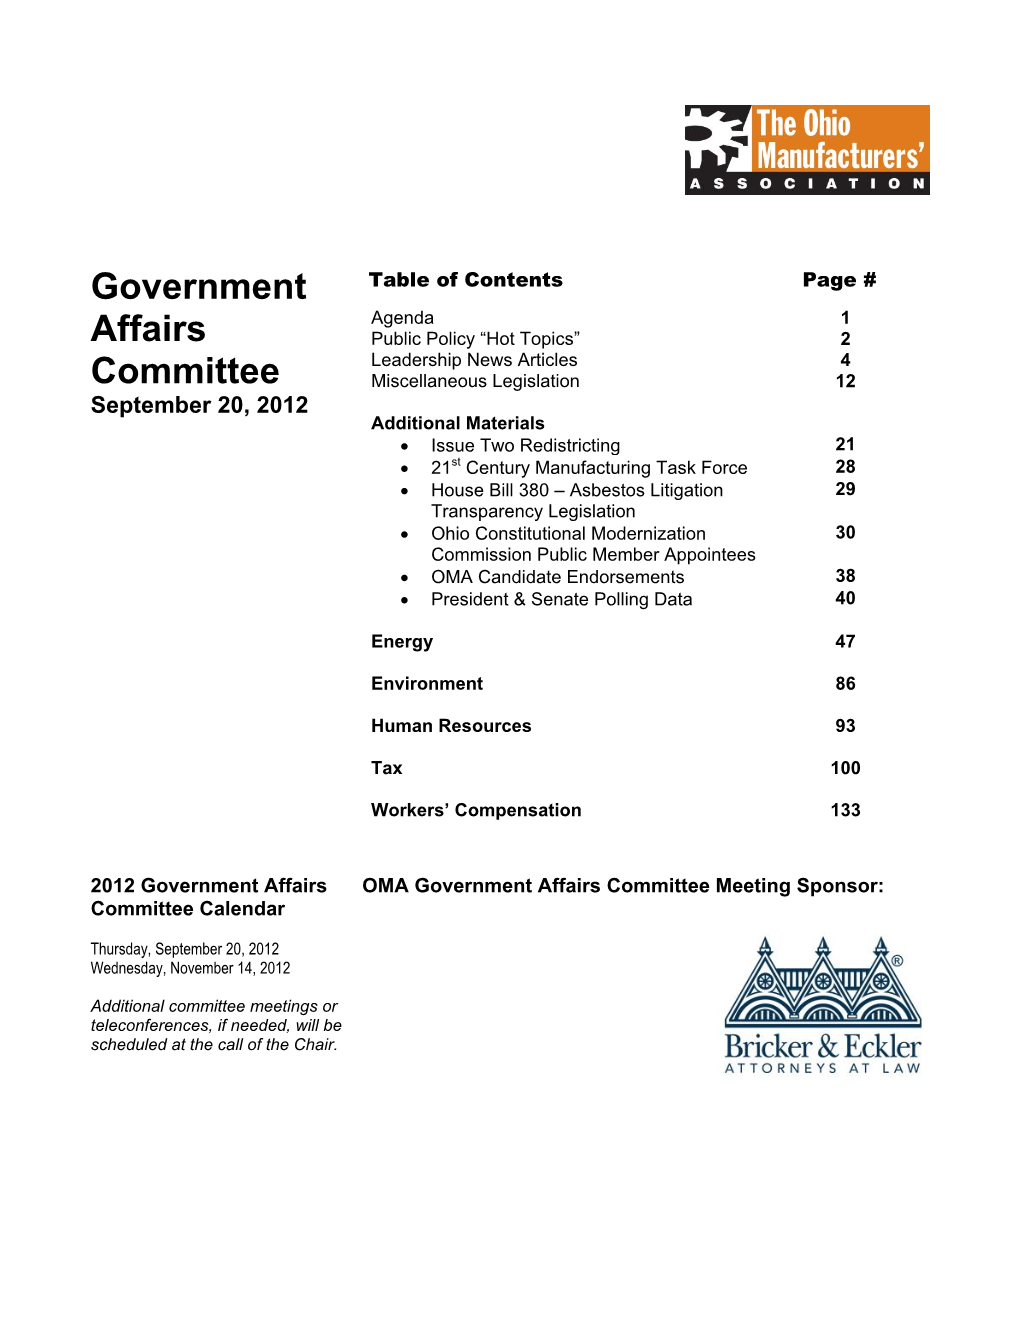 Government Affairs Committee Meeting Sponsor: Committee Calendar